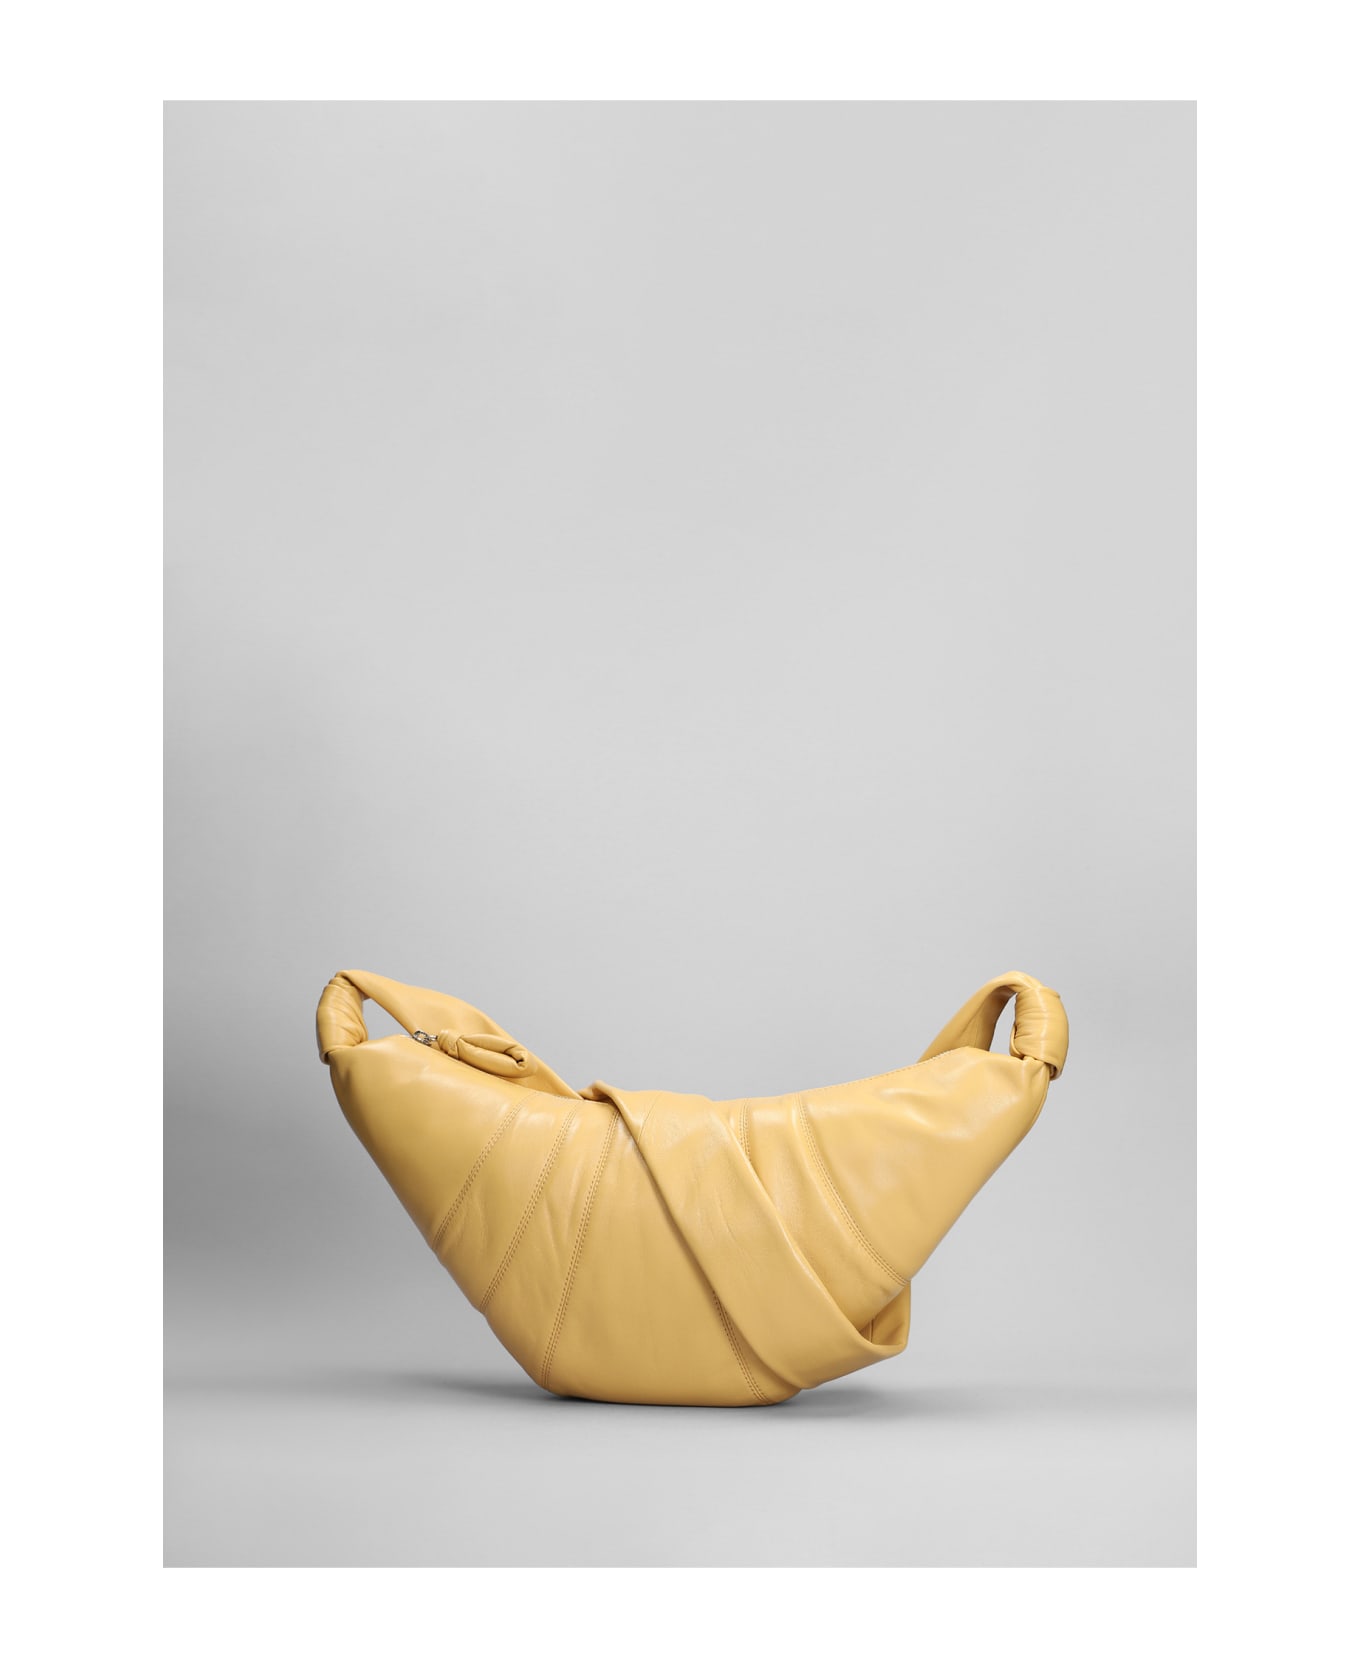 Lemaire Meduim Croissant Shoulder Bag In Yellow Leather - Butter